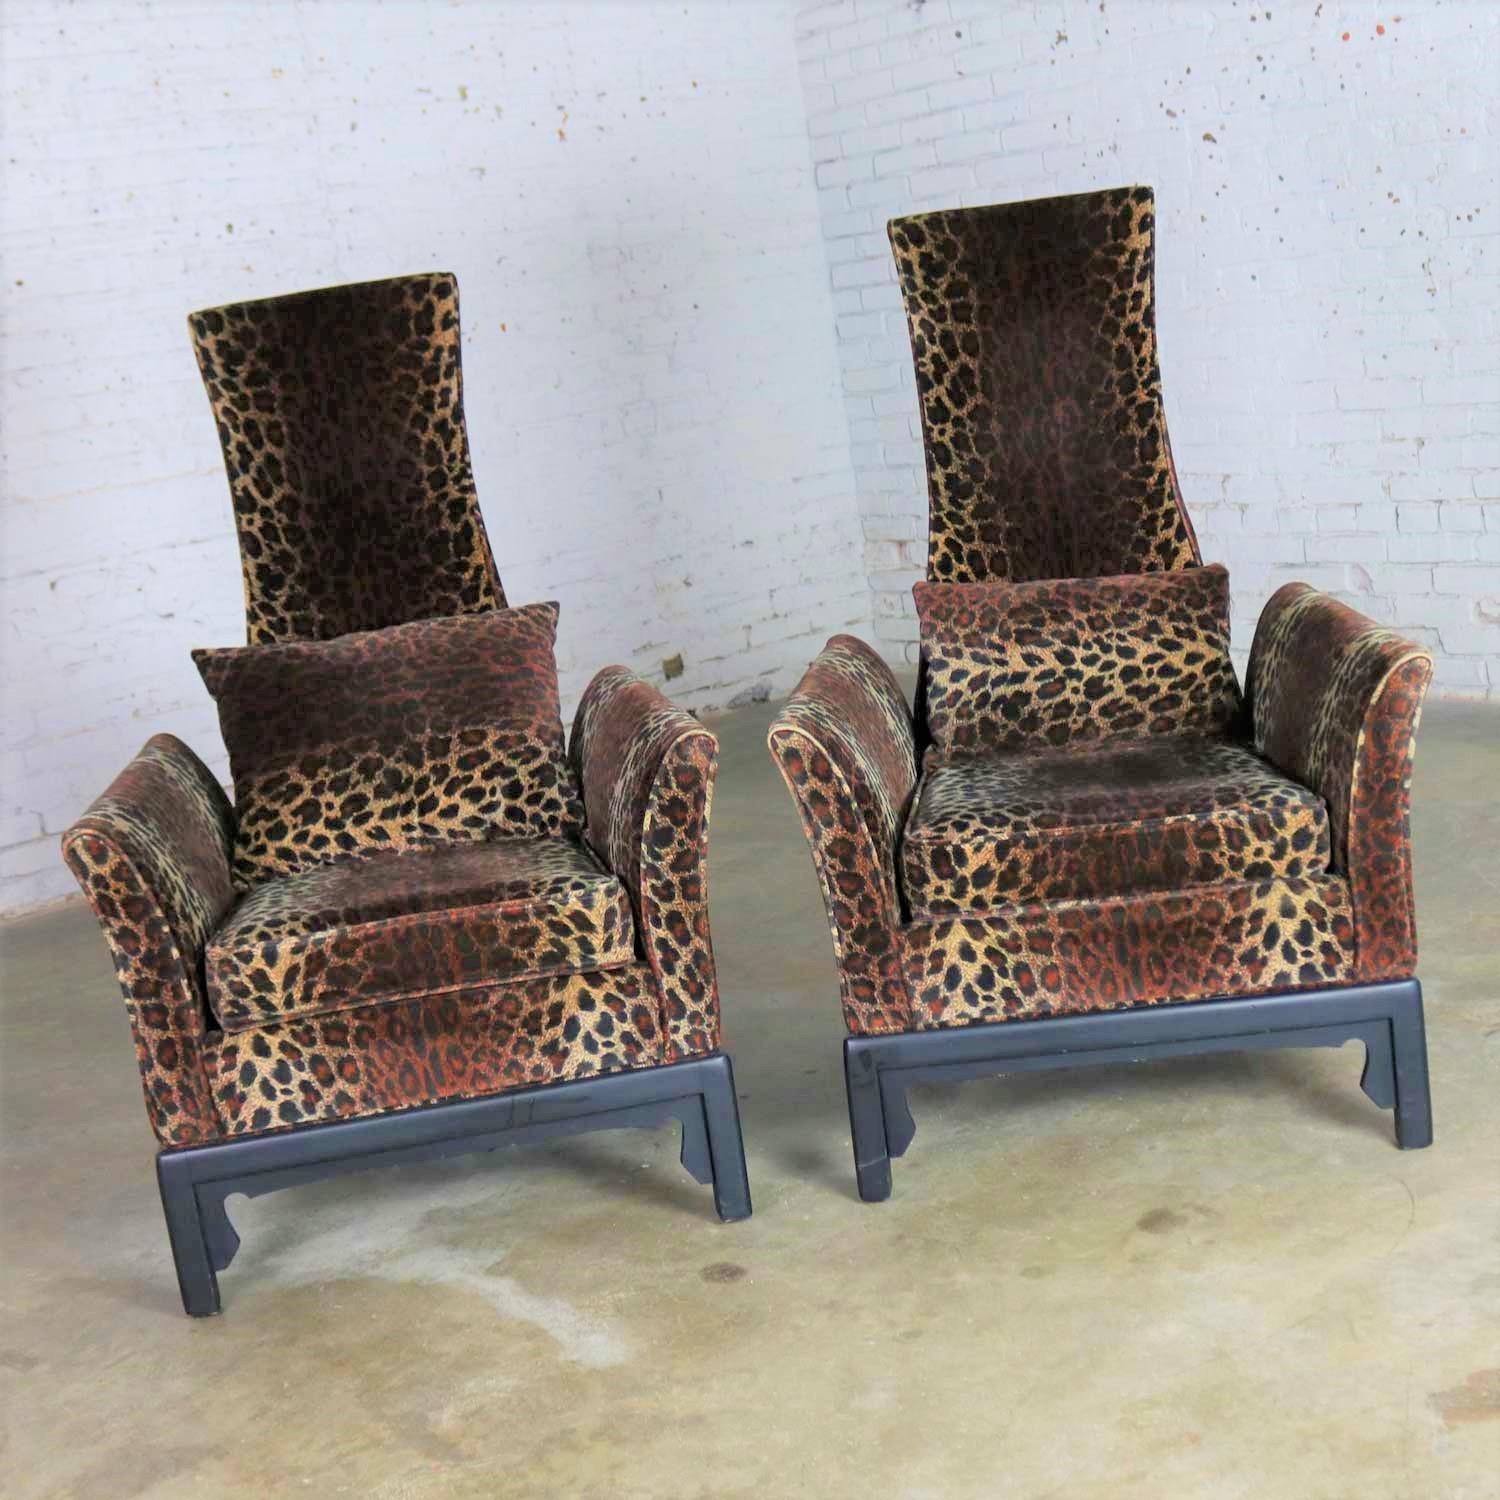 Outstanding pair of midcentury Hollywood Regency lounge chairs with high narrow backs made in the style of the infamous James Mont and upholstered in gorgeous animal print velvet on an Asian Style black wood base. They are in fabulous condition. The